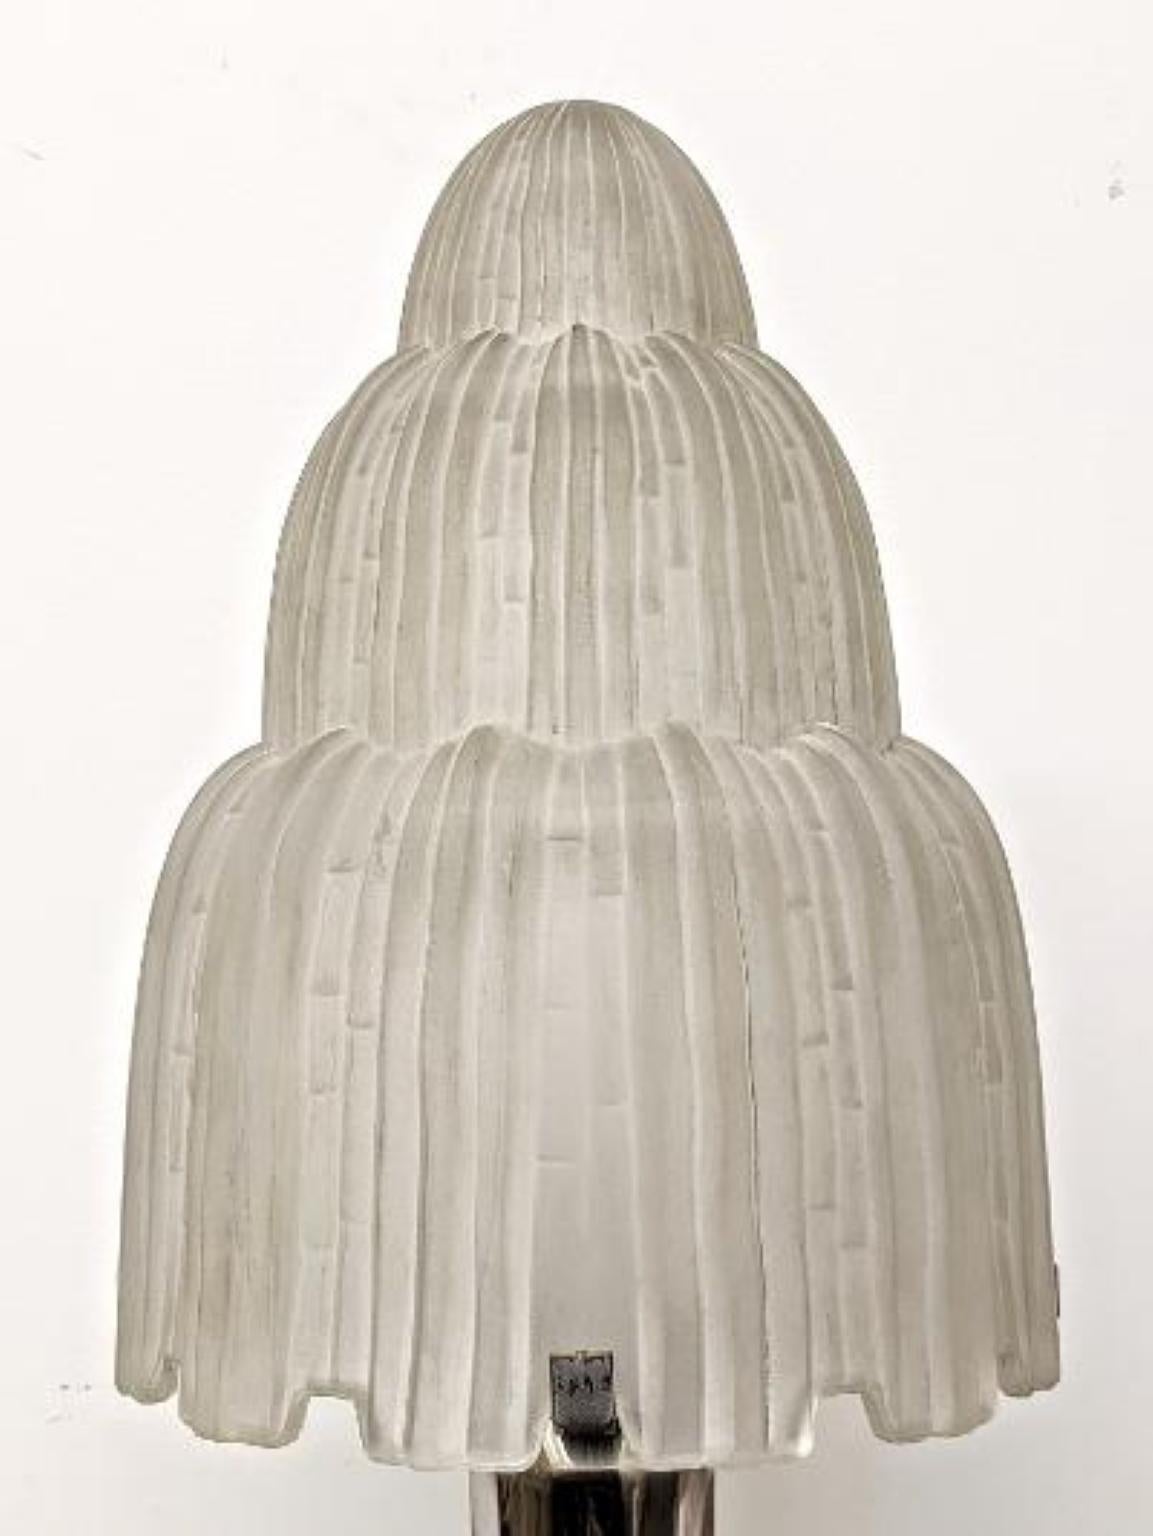 A rare French Art Deco table lamp known as the 